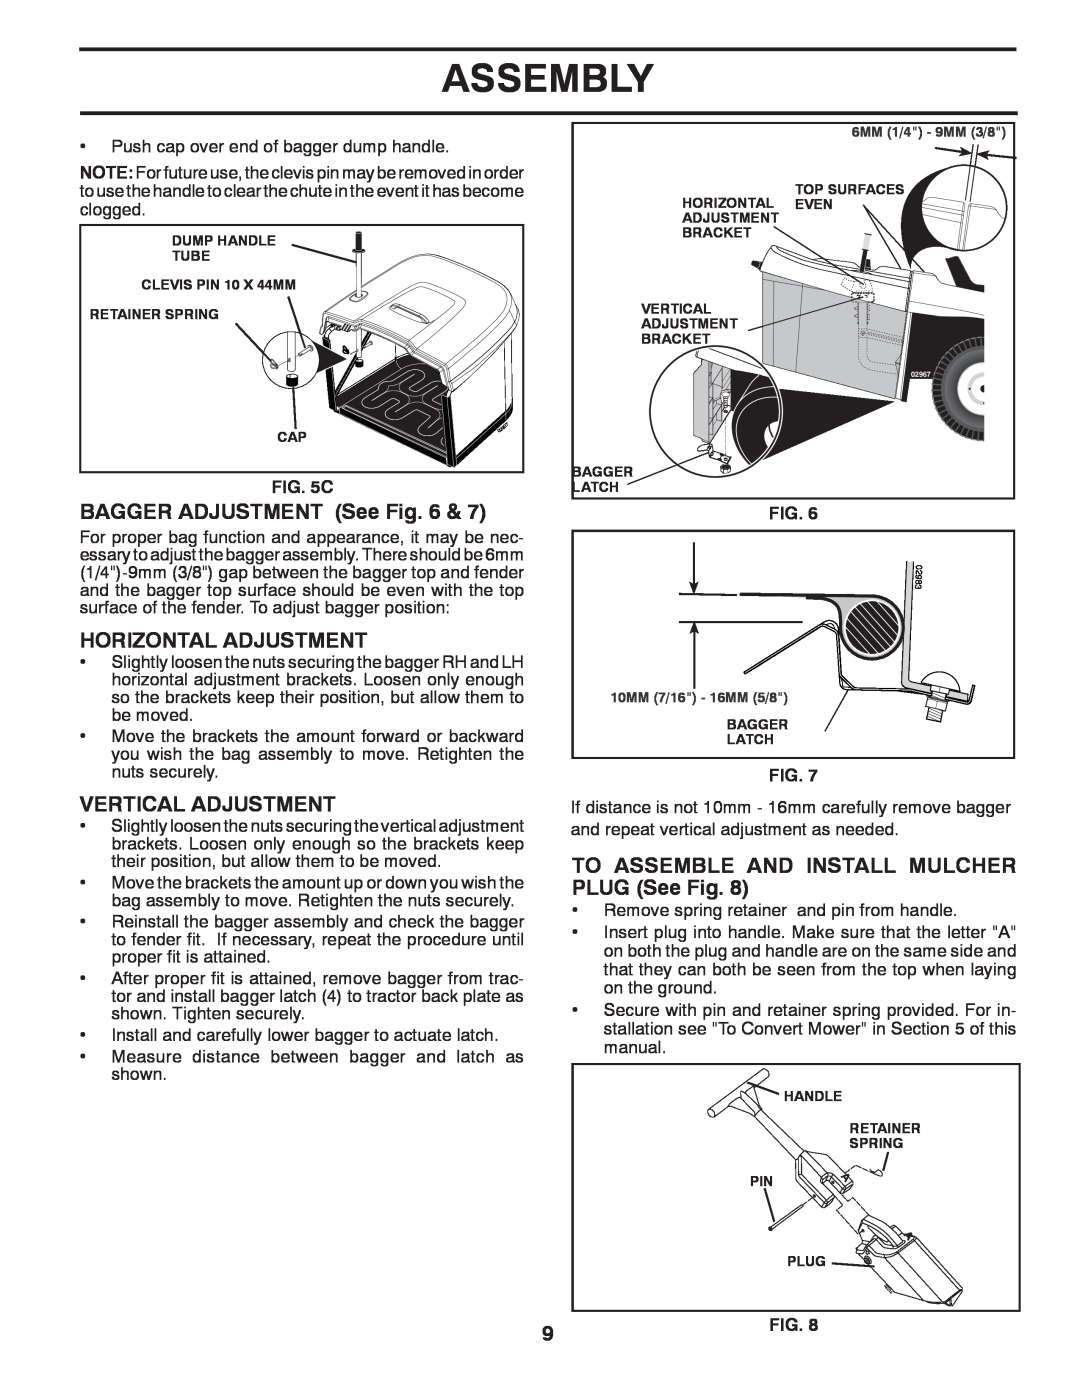 Husqvarna CTH2036 TWIN owner manual BAGGER ADJUSTMENT See, Horizontal Adjustment, Vertical Adjustment, Assembly 